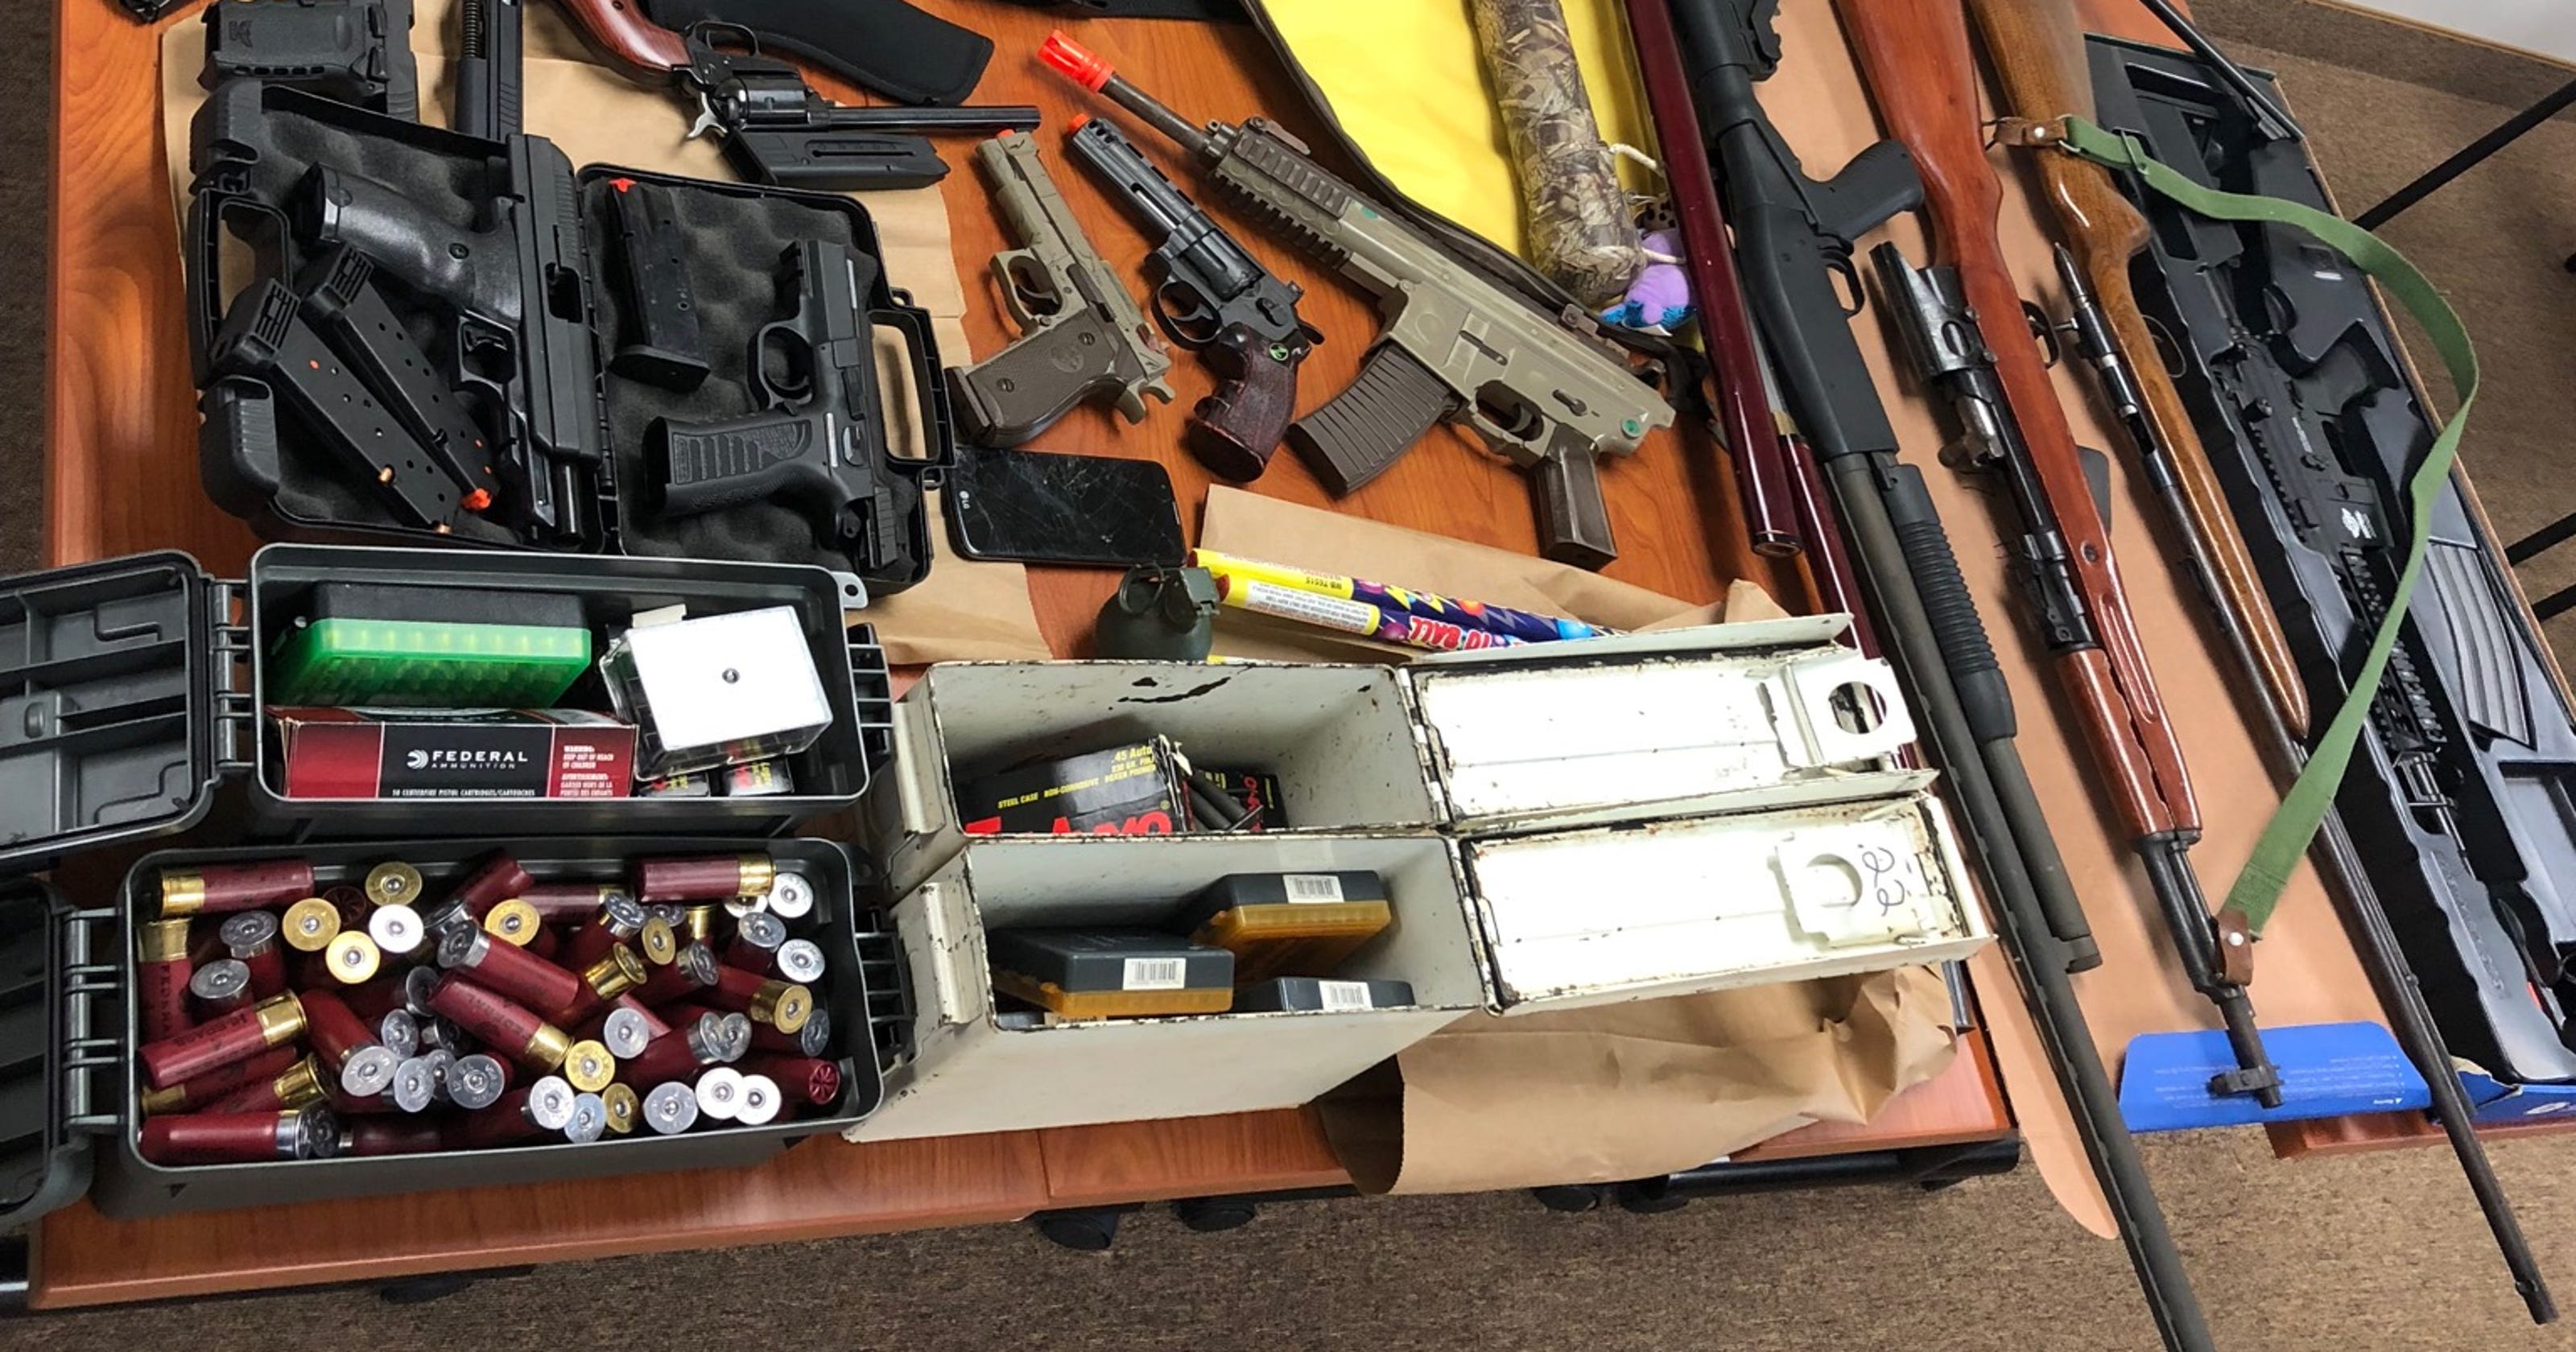 Rifle, shotguns, pistols found in bedroom of teen with 'hit list'